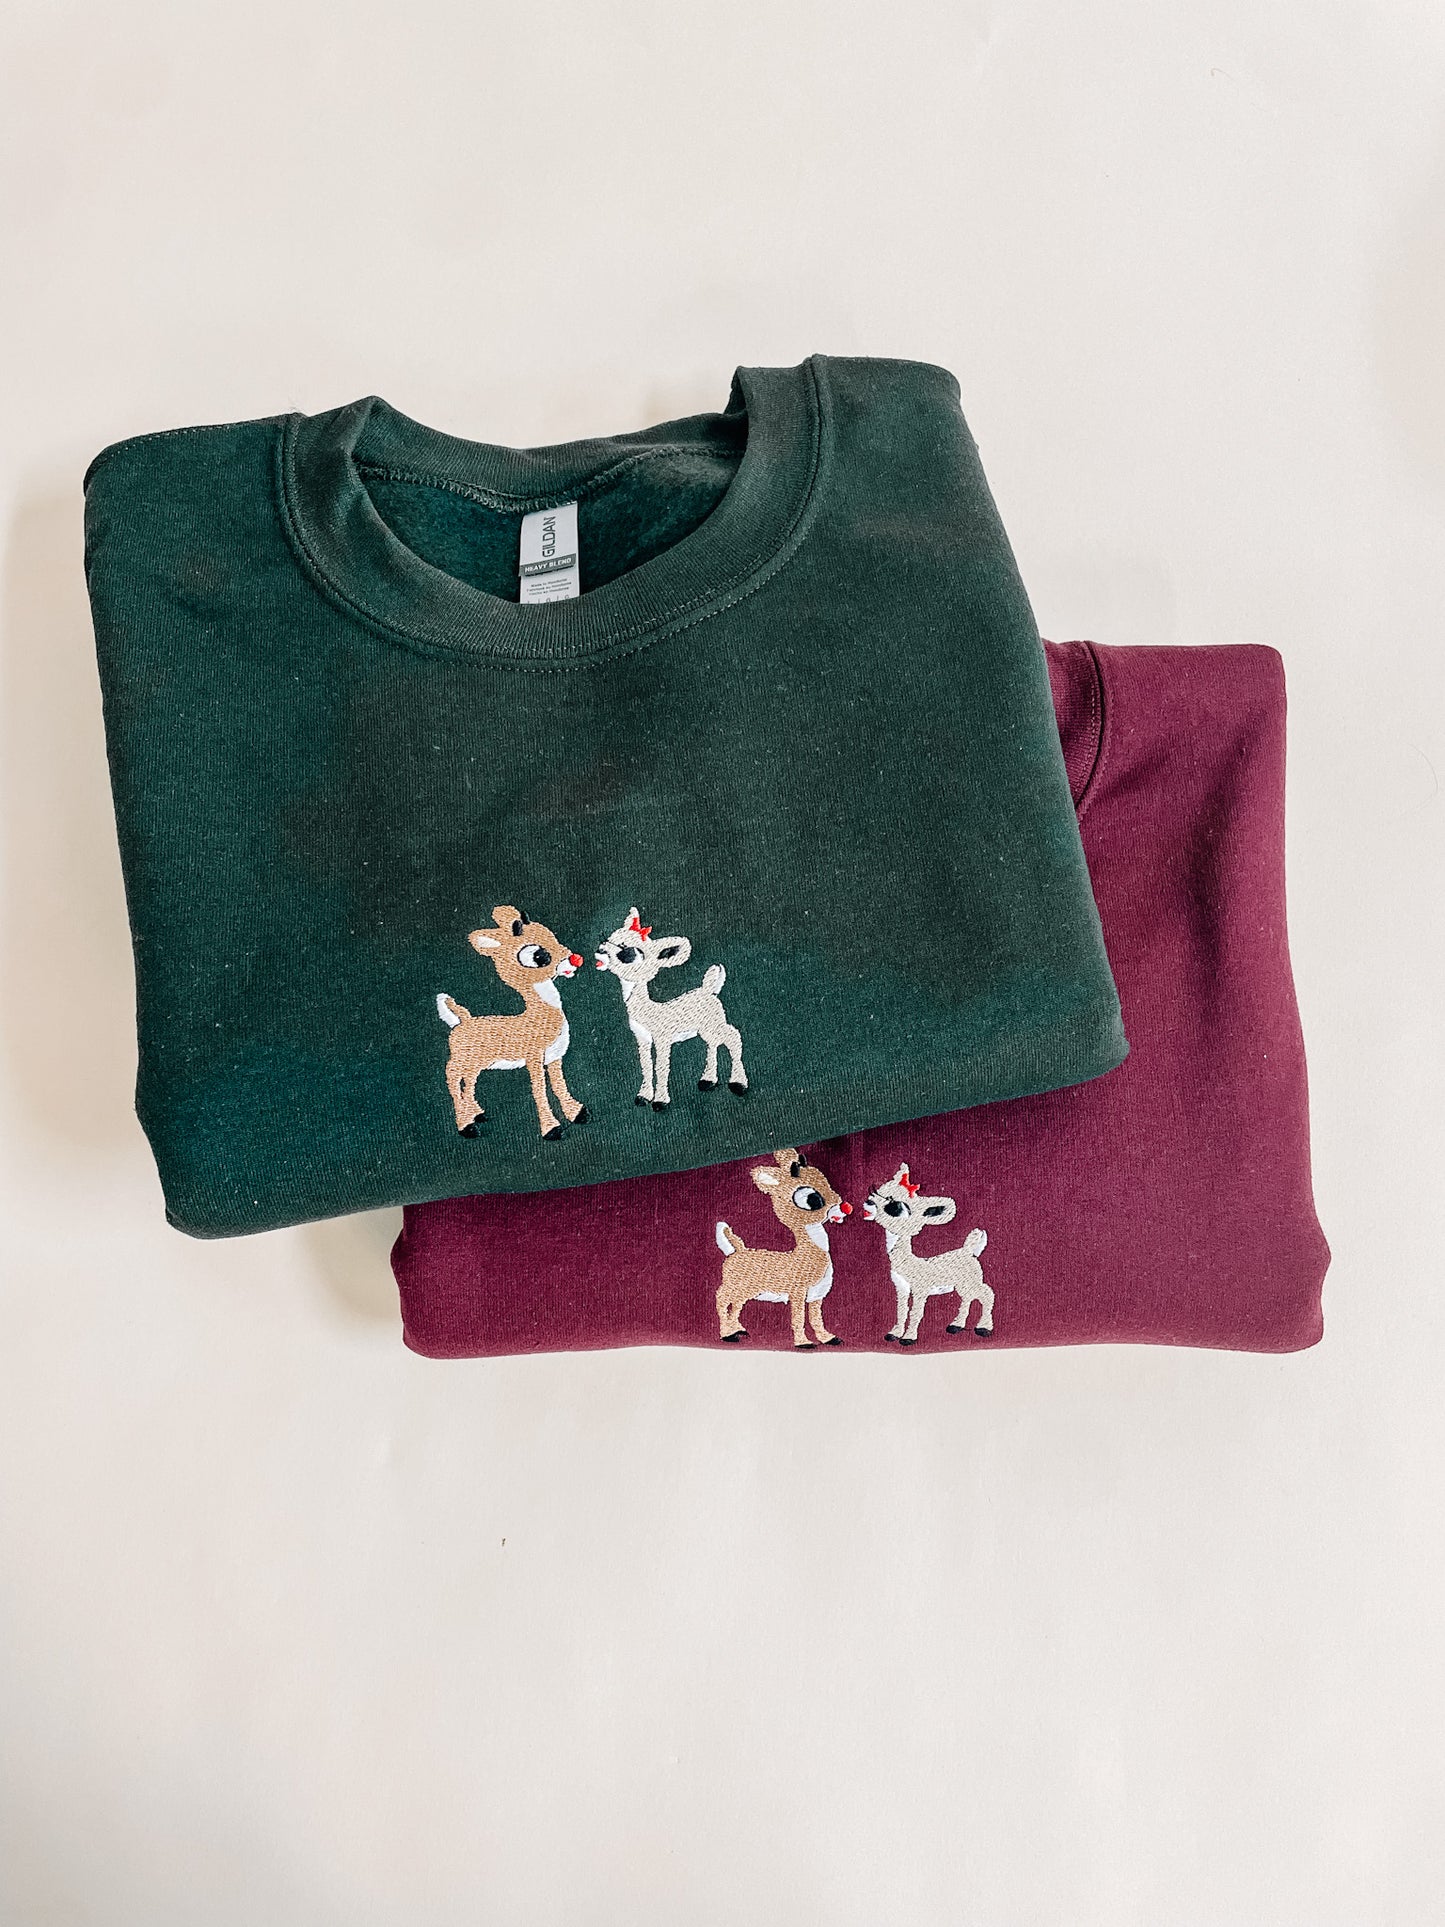 Rudolph and Clarise Adult Embroidered Sweatshirt